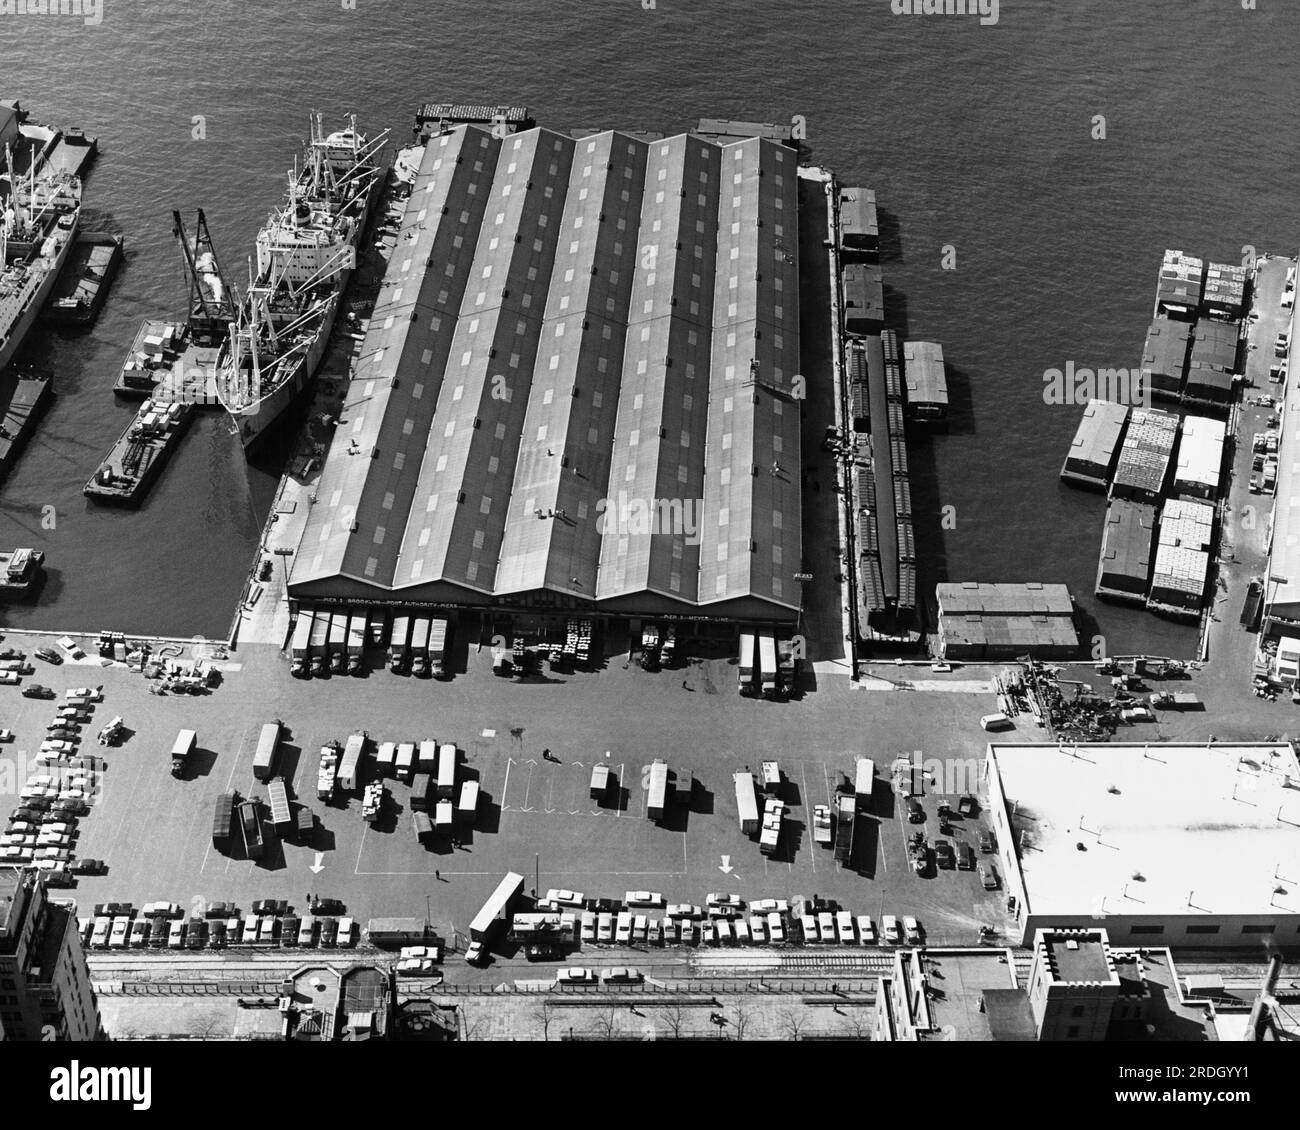 New York, New York   March 22, 1962 An aerial view of piers in Brooklyn. The Brooklyn Port Authority Piers #2 and 6 are at the left with the Meyer Line Pier #2 at the right. Stock Photo